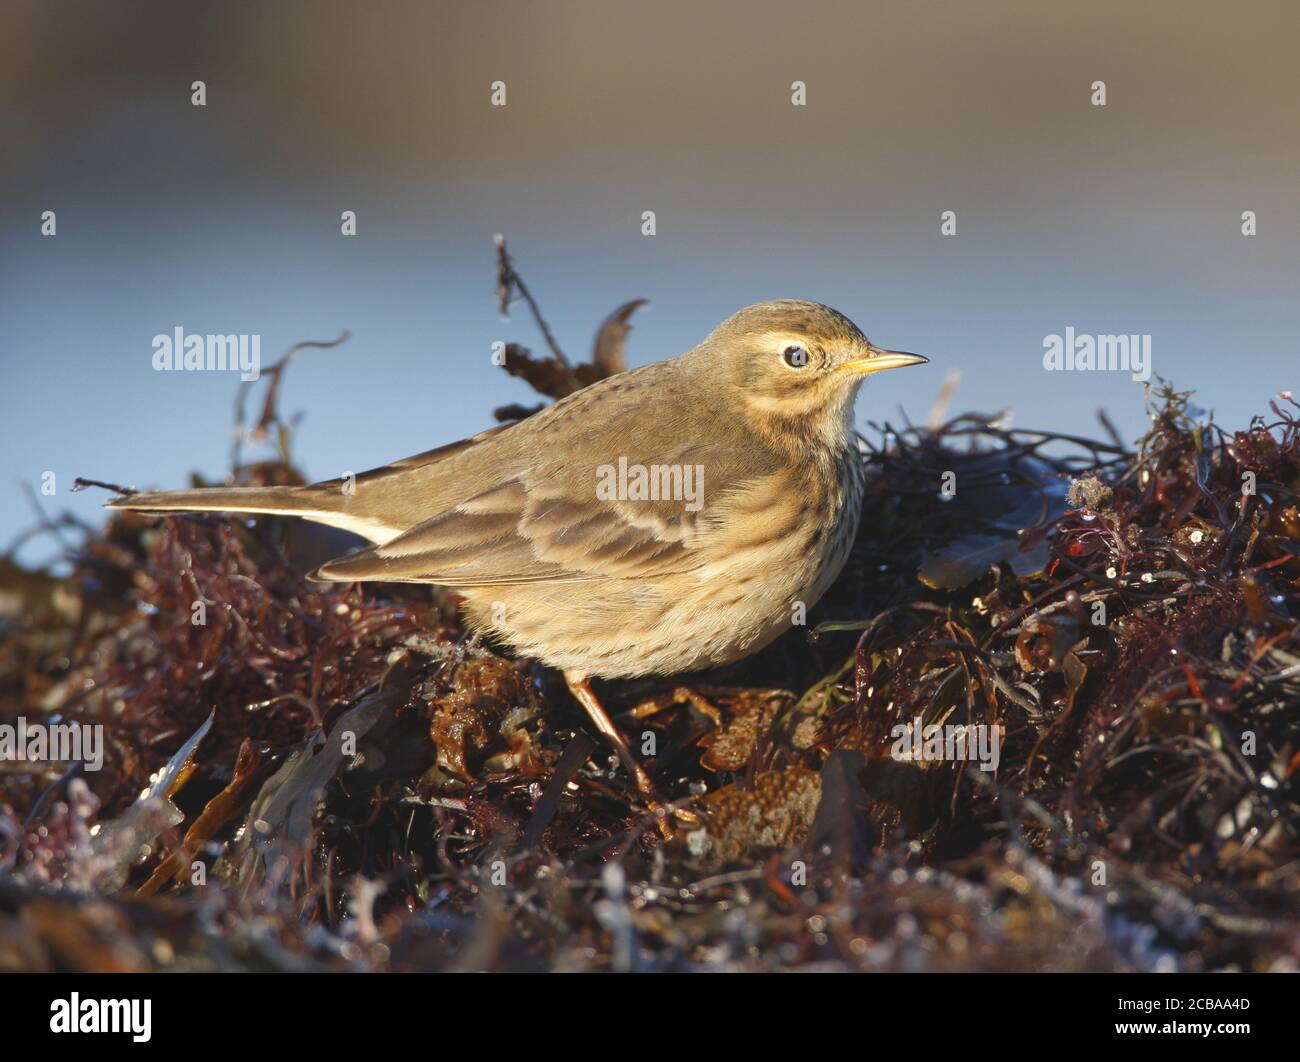 Buff-bellied pipit, American pipit (Anthus rubescens, Anthus rubescens rubescens), on seaweed, Sweden, Halland Stock Photo